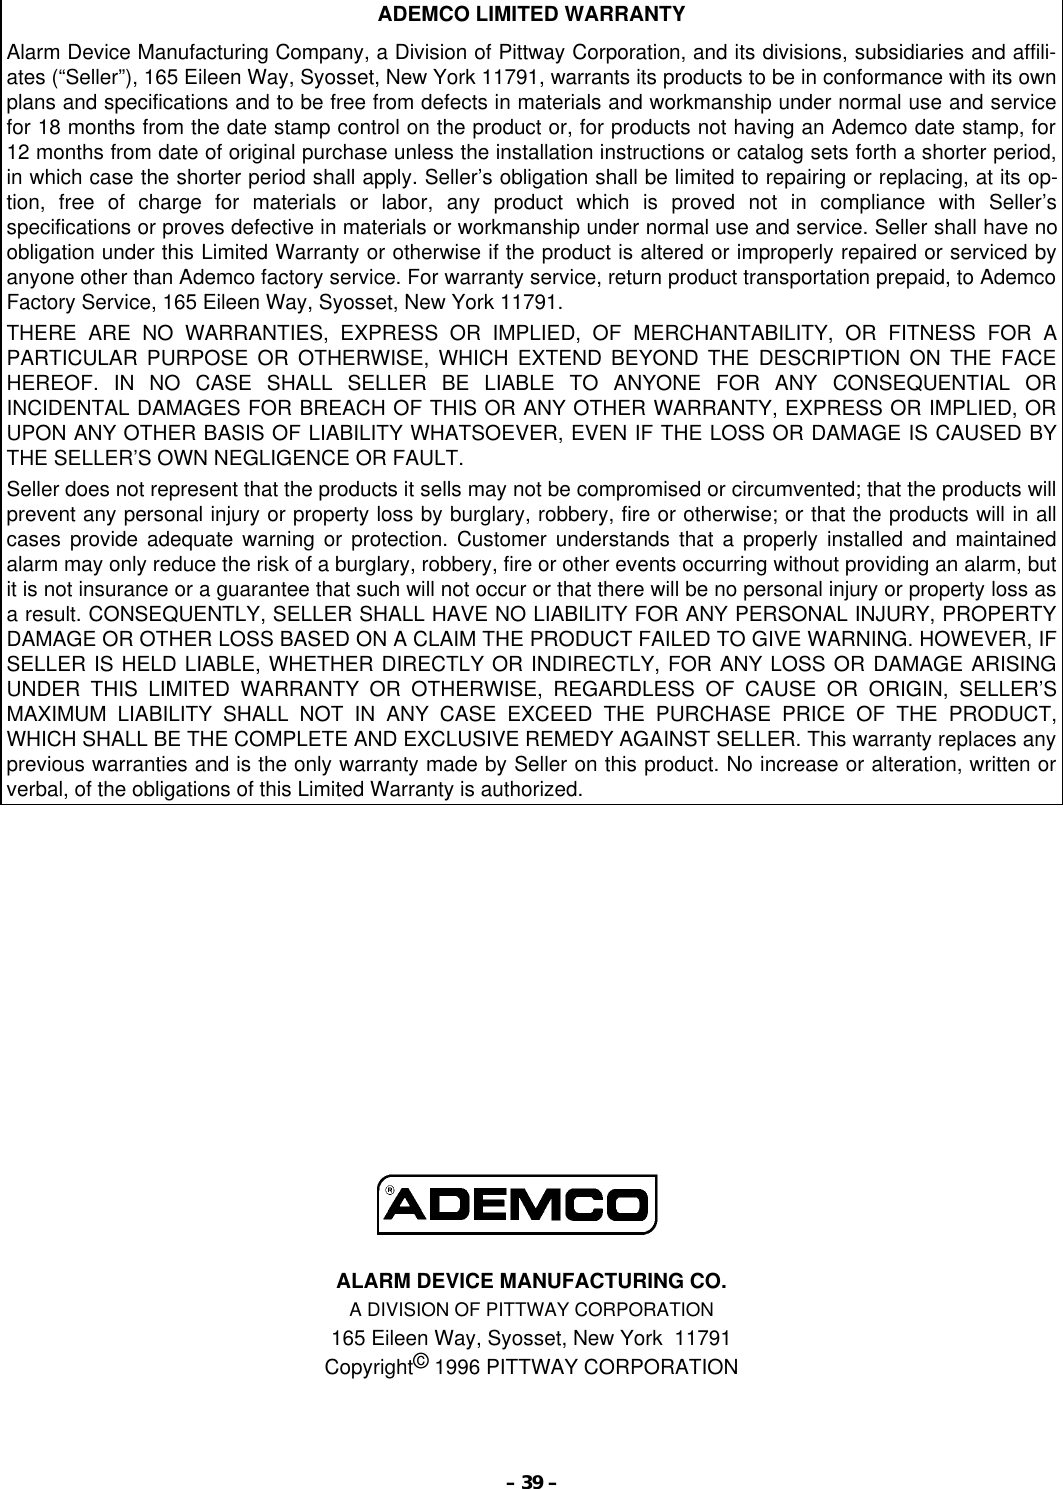 – 39 –ADEMCO LIMITED WARRANTYAlarm Device Manufacturing Company, a Division of Pittway Corporation, and its divisions, subsidiaries and affili-ates (“Seller”), 165 Eileen Way, Syosset, New York 11791, warrants its products to be in conformance with its ownplans and specifications and to be free from defects in materials and workmanship under normal use and servicefor 18 months from the date stamp control on the product or, for products not having an Ademco date stamp, for12 months from date of original purchase unless the installation instructions or catalog sets forth a shorter period,in which case the shorter period shall apply. Seller’s obligation shall be limited to repairing or replacing, at its op-tion, free of charge for materials or labor, any product which is proved not in compliance with Seller’sspecifications or proves defective in materials or workmanship under normal use and service. Seller shall have noobligation under this Limited Warranty or otherwise if the product is altered or improperly repaired or serviced byanyone other than Ademco factory service. For warranty service, return product transportation prepaid, to AdemcoFactory Service, 165 Eileen Way, Syosset, New York 11791.THERE ARE NO WARRANTIES, EXPRESS OR IMPLIED, OF MERCHANTABILITY, OR FITNESS FOR APARTICULAR PURPOSE OR OTHERWISE, WHICH EXTEND BEYOND THE DESCRIPTION ON THE FACEHEREOF. IN NO CASE SHALL SELLER BE LIABLE TO ANYONE FOR ANY CONSEQUENTIAL ORINCIDENTAL DAMAGES FOR BREACH OF THIS OR ANY OTHER WARRANTY, EXPRESS OR IMPLIED, ORUPON ANY OTHER BASIS OF LIABILITY WHATSOEVER, EVEN IF THE LOSS OR DAMAGE IS CAUSED BYTHE SELLER’S OWN NEGLIGENCE OR FAULT.Seller does not represent that the products it sells may not be compromised or circumvented; that the products willprevent any personal injury or property loss by burglary, robbery, fire or otherwise; or that the products will in allcases provide adequate warning or protection. Customer understands that a properly installed and maintainedalarm may only reduce the risk of a burglary, robbery, fire or other events occurring without providing an alarm, butit is not insurance or a guarantee that such will not occur or that there will be no personal injury or property loss asa result. CONSEQUENTLY, SELLER SHALL HAVE NO LIABILITY FOR ANY PERSONAL INJURY, PROPERTYDAMAGE OR OTHER LOSS BASED ON A CLAIM THE PRODUCT FAILED TO GIVE WARNING. HOWEVER, IFSELLER IS HELD LIABLE, WHETHER DIRECTLY OR INDIRECTLY, FOR ANY LOSS OR DAMAGE ARISINGUNDER THIS LIMITED WARRANTY OR OTHERWISE, REGARDLESS OF CAUSE OR ORIGIN, SELLER’SMAXIMUM LIABILITY SHALL NOT IN ANY CASE EXCEED THE PURCHASE PRICE OF THE PRODUCT,WHICH SHALL BE THE COMPLETE AND EXCLUSIVE REMEDY AGAINST SELLER. This warranty replaces anyprevious warranties and is the only warranty made by Seller on this product. No increase or alteration, written orverbal, of the obligations of this Limited Warranty is authorized.ALARM DEVICE MANUFACTURING CO.A DIVISION OF PITTWAY CORPORATION165 Eileen Way, Syosset, New York  11791Copyright© 1996 PITTWAY CORPORATION